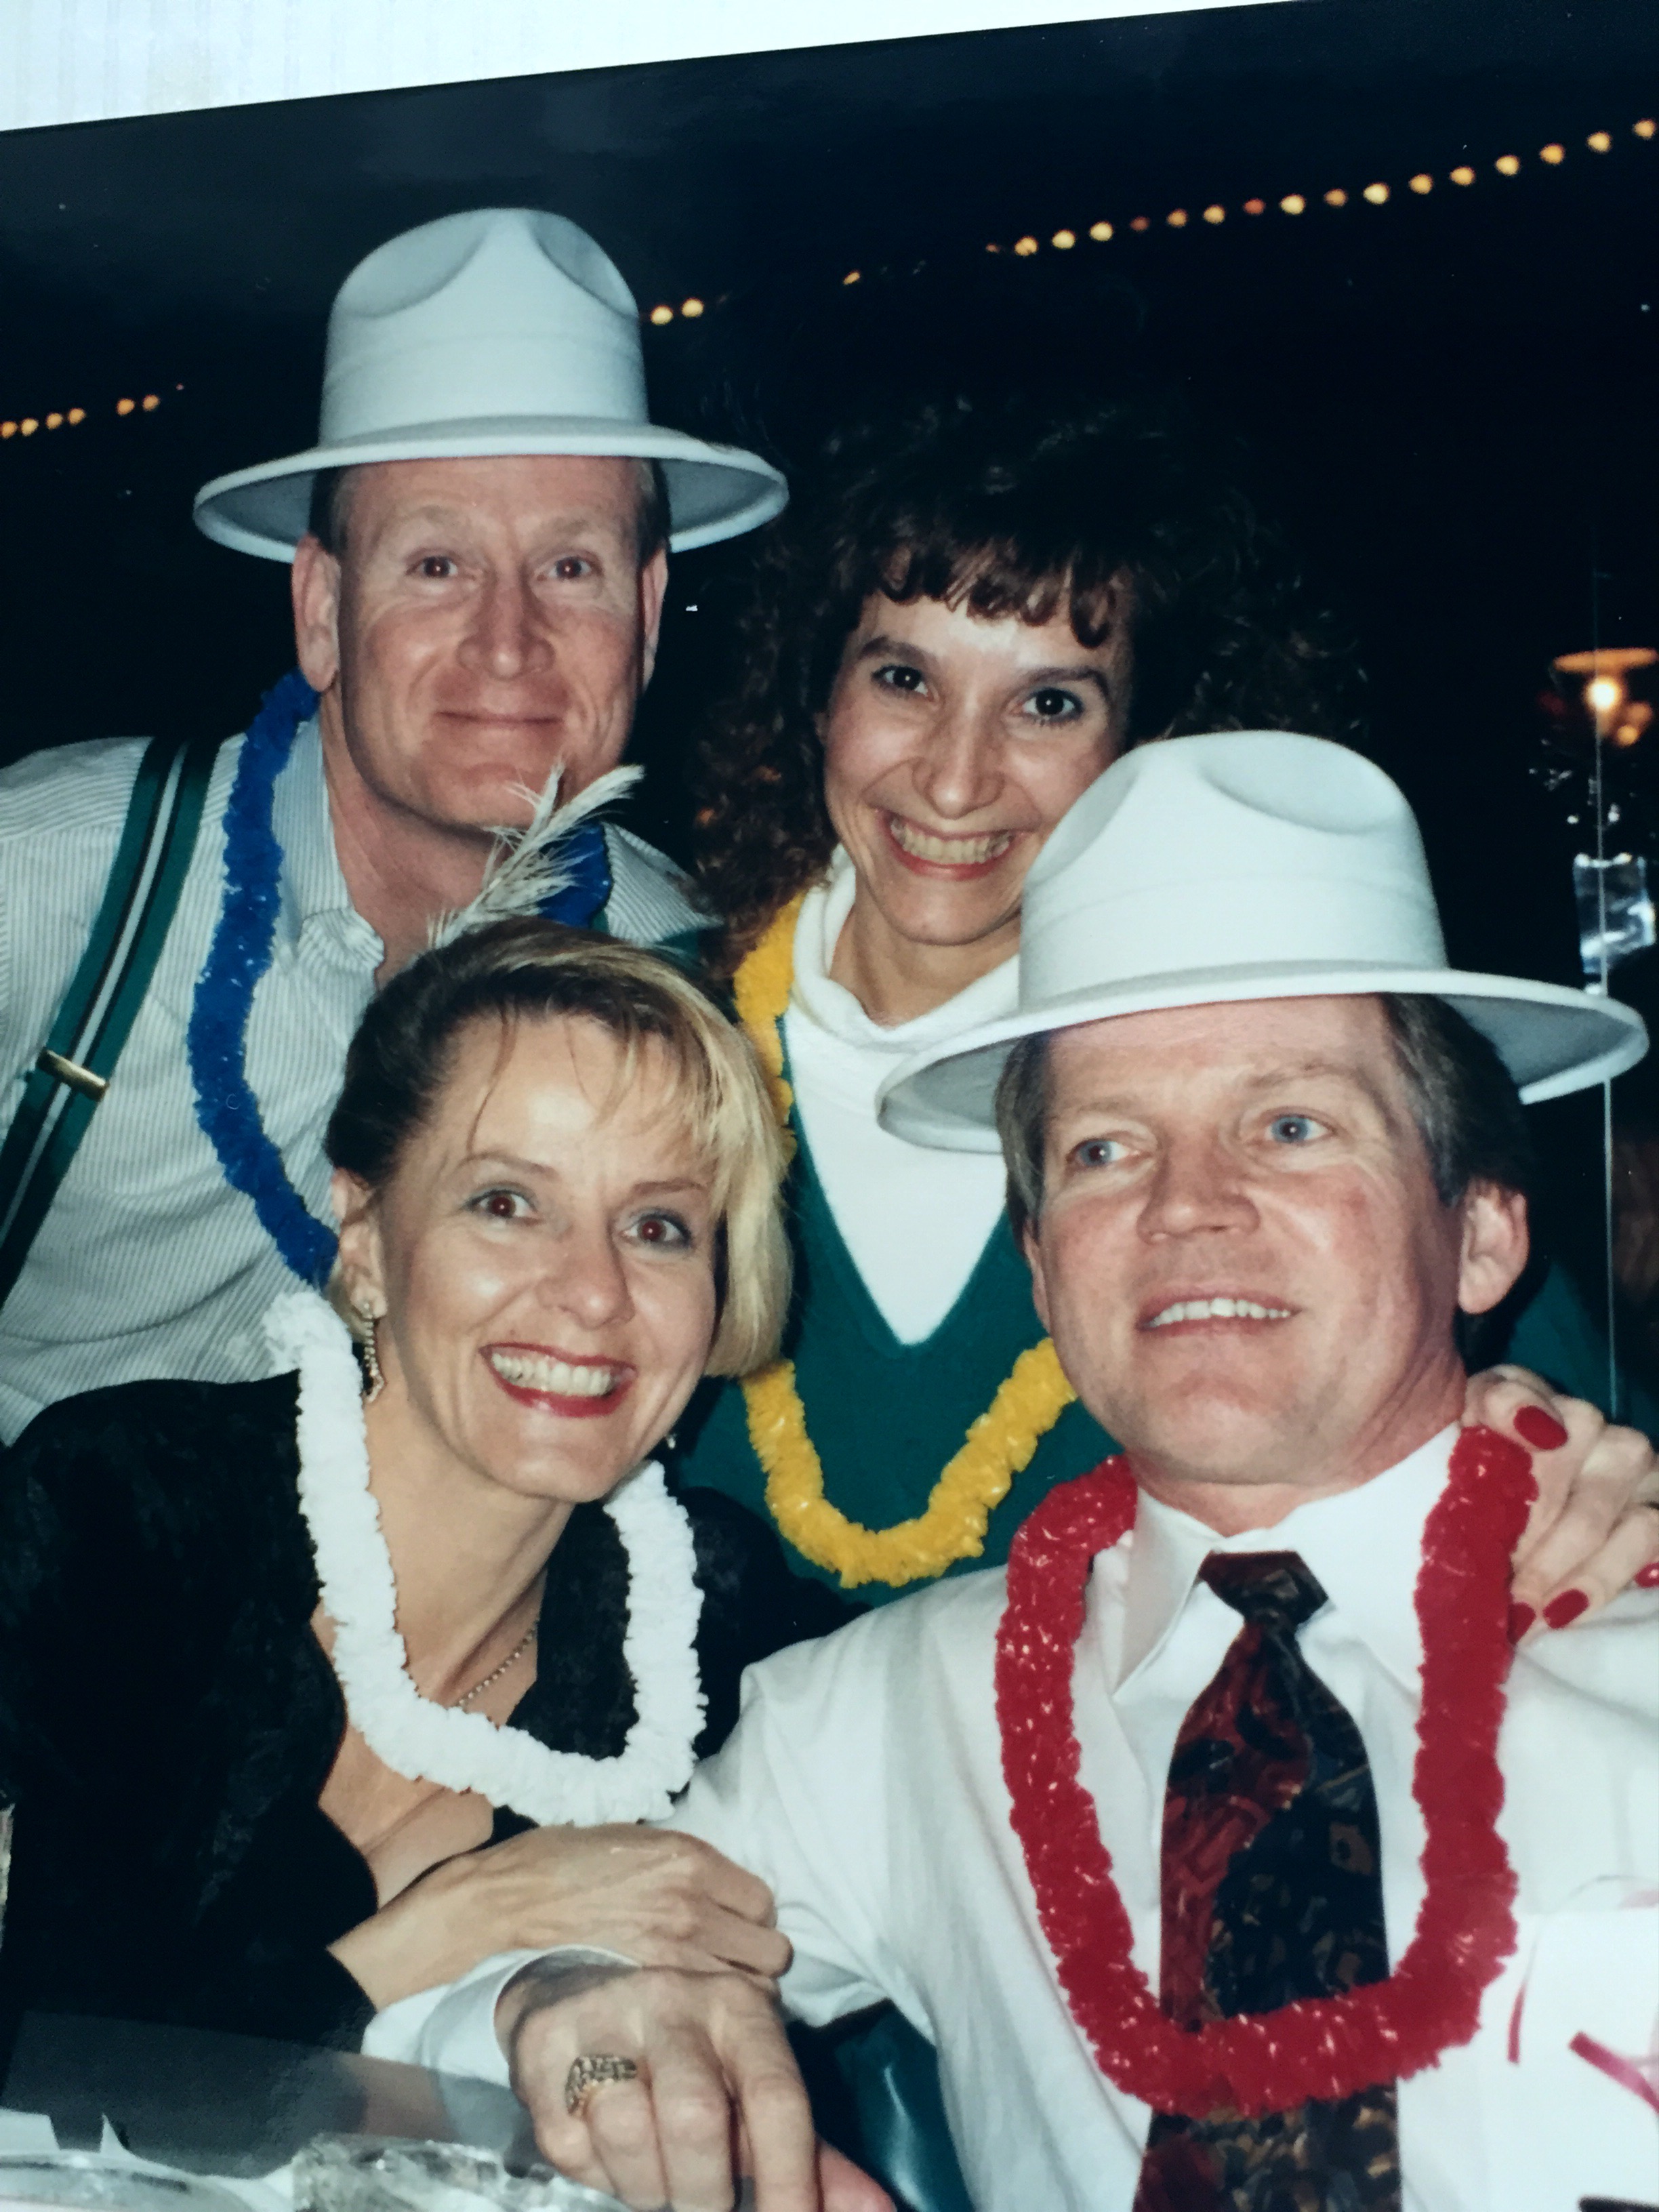 Our friends, Ron & Jane, bringing in the New Year, 1990.